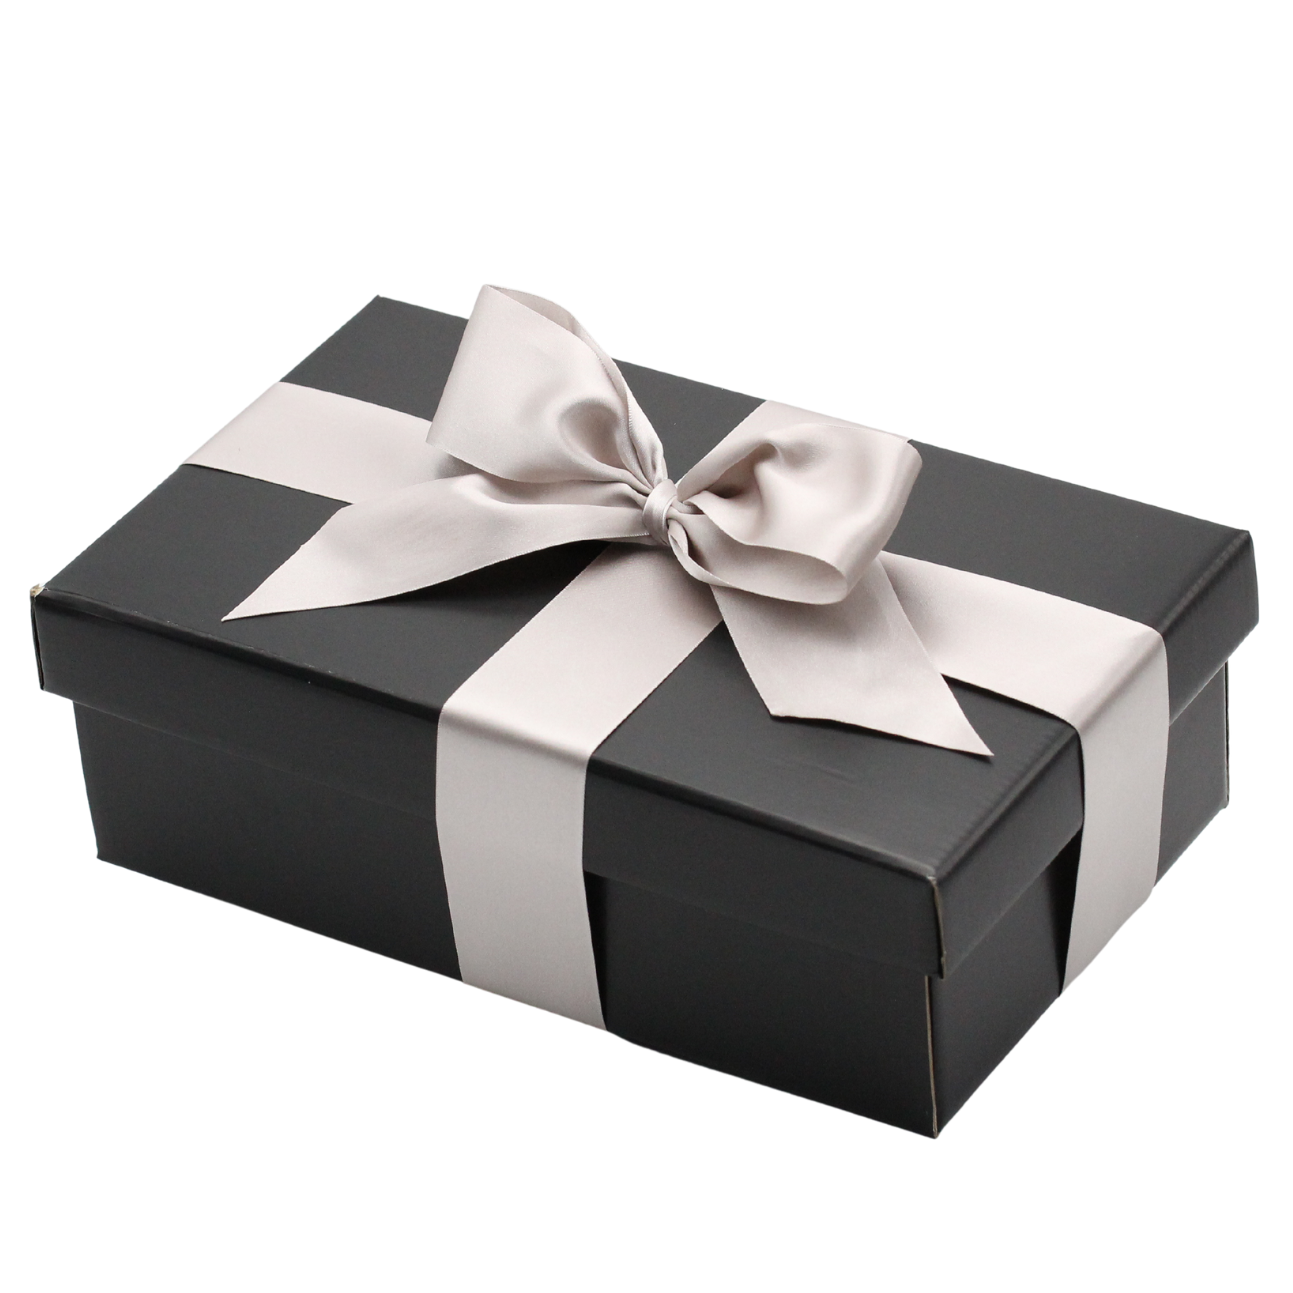 Gift Box or Present Box with Silver Ribbon Bow Isolated on White Background  Stock Illustration - Illustration of front, grey: 101115337